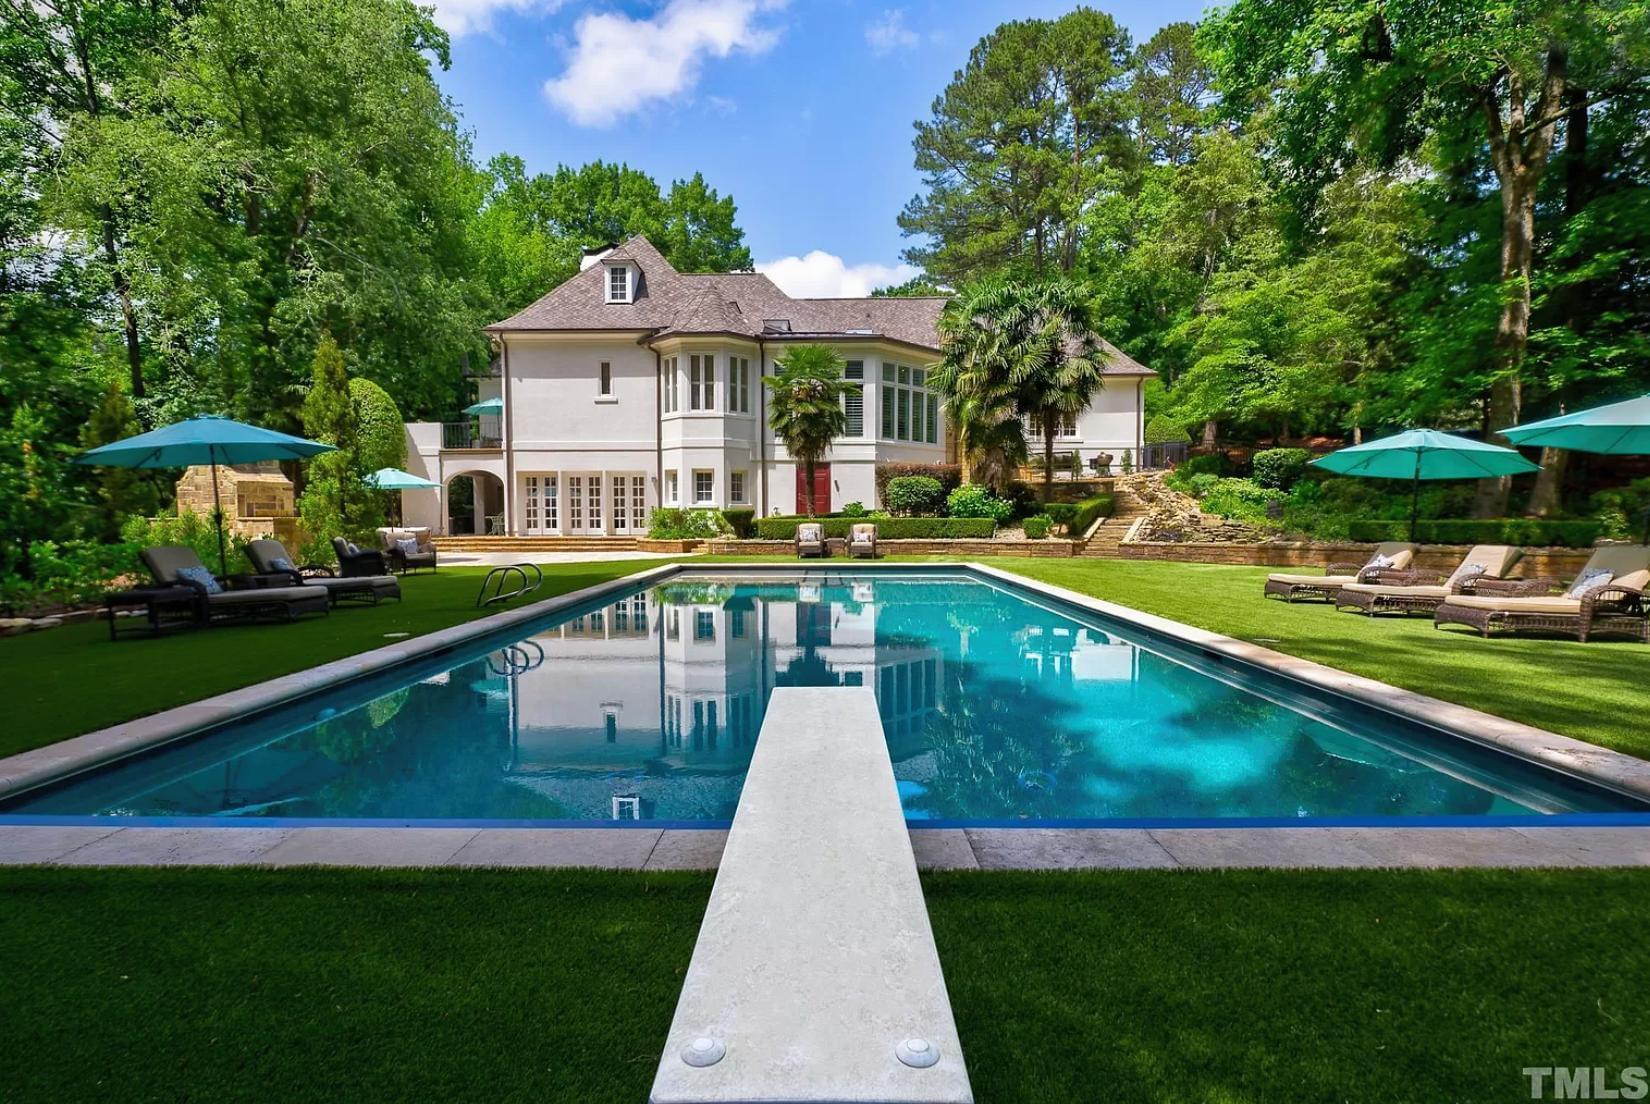 A lush, green backyard oasis with a clear, teal swimming pool, diving board, lounge chairs with umbrellas, and a large white house